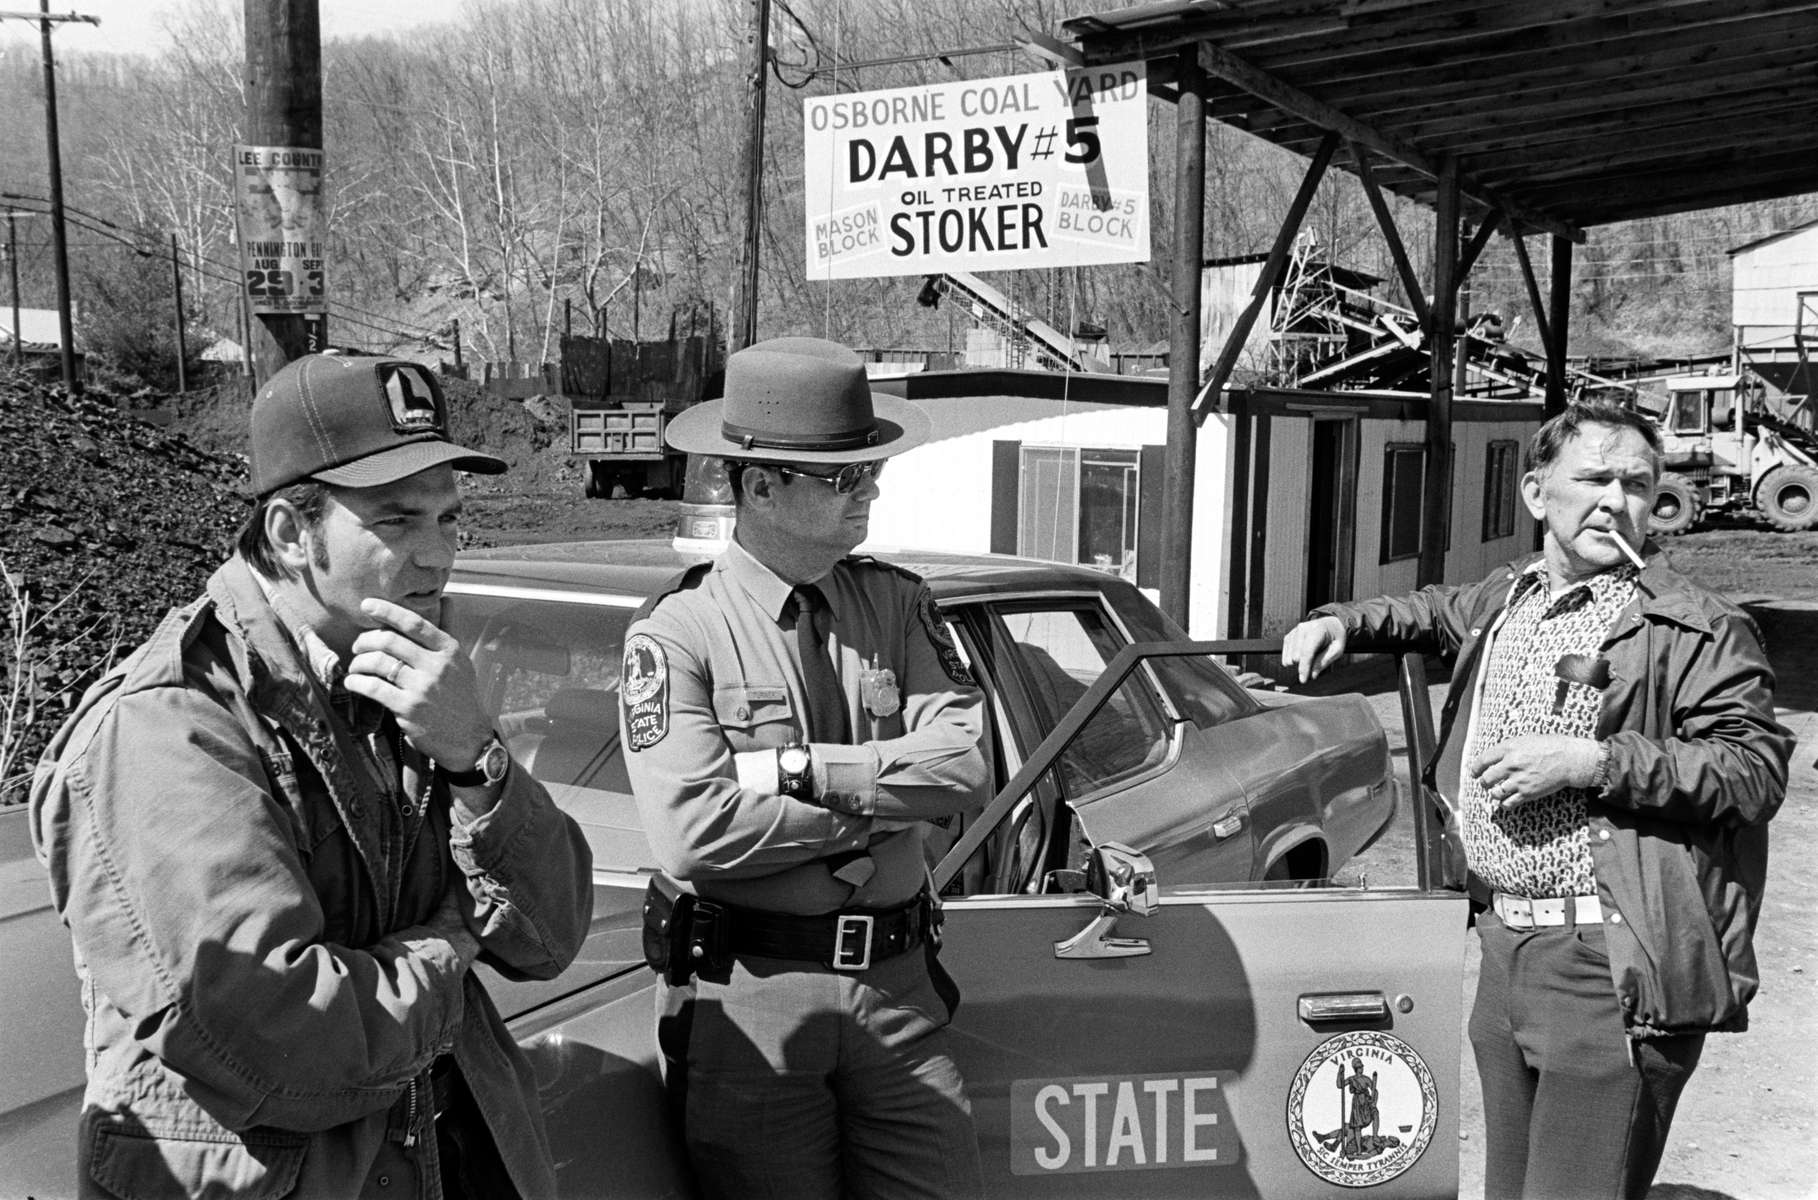 State police patrol the Osborne Coal Yard near Pennington Gap, VA during the 1978 national bituminous coal strike led by the United Mine Workers of America. The strike lasted 110 days. When it was settled, coal miners were forced to pay for part of their health care for the first time in 30 years, they lost their pension benefits, and they lost the right to strike over local issues. By 2014, coal mining had largely shifted to open pit mines in Wyoming. The once 200,000-strong UMW was reduced to just 20,000 miners, mostly in underground mines in Kentucky and West Virginia. Jon Chase photo